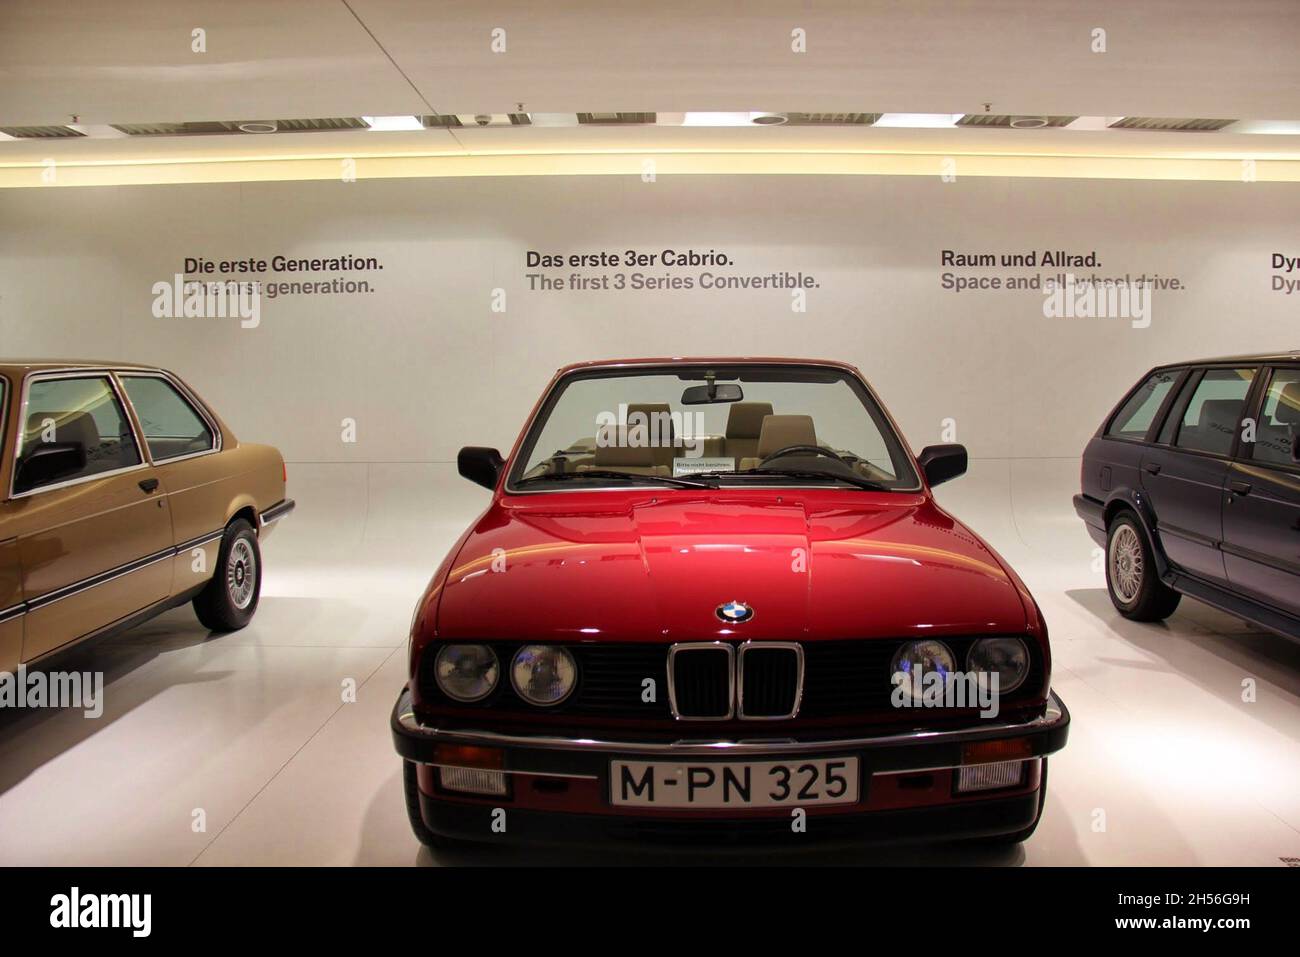 BMW 3 Series (E30): Front view, red color, cabriolet, 1st 3 series cabriolet, 2nd generation, manufactured 1981-1994. BMW Museum, Munich - Germany . Stock Photo